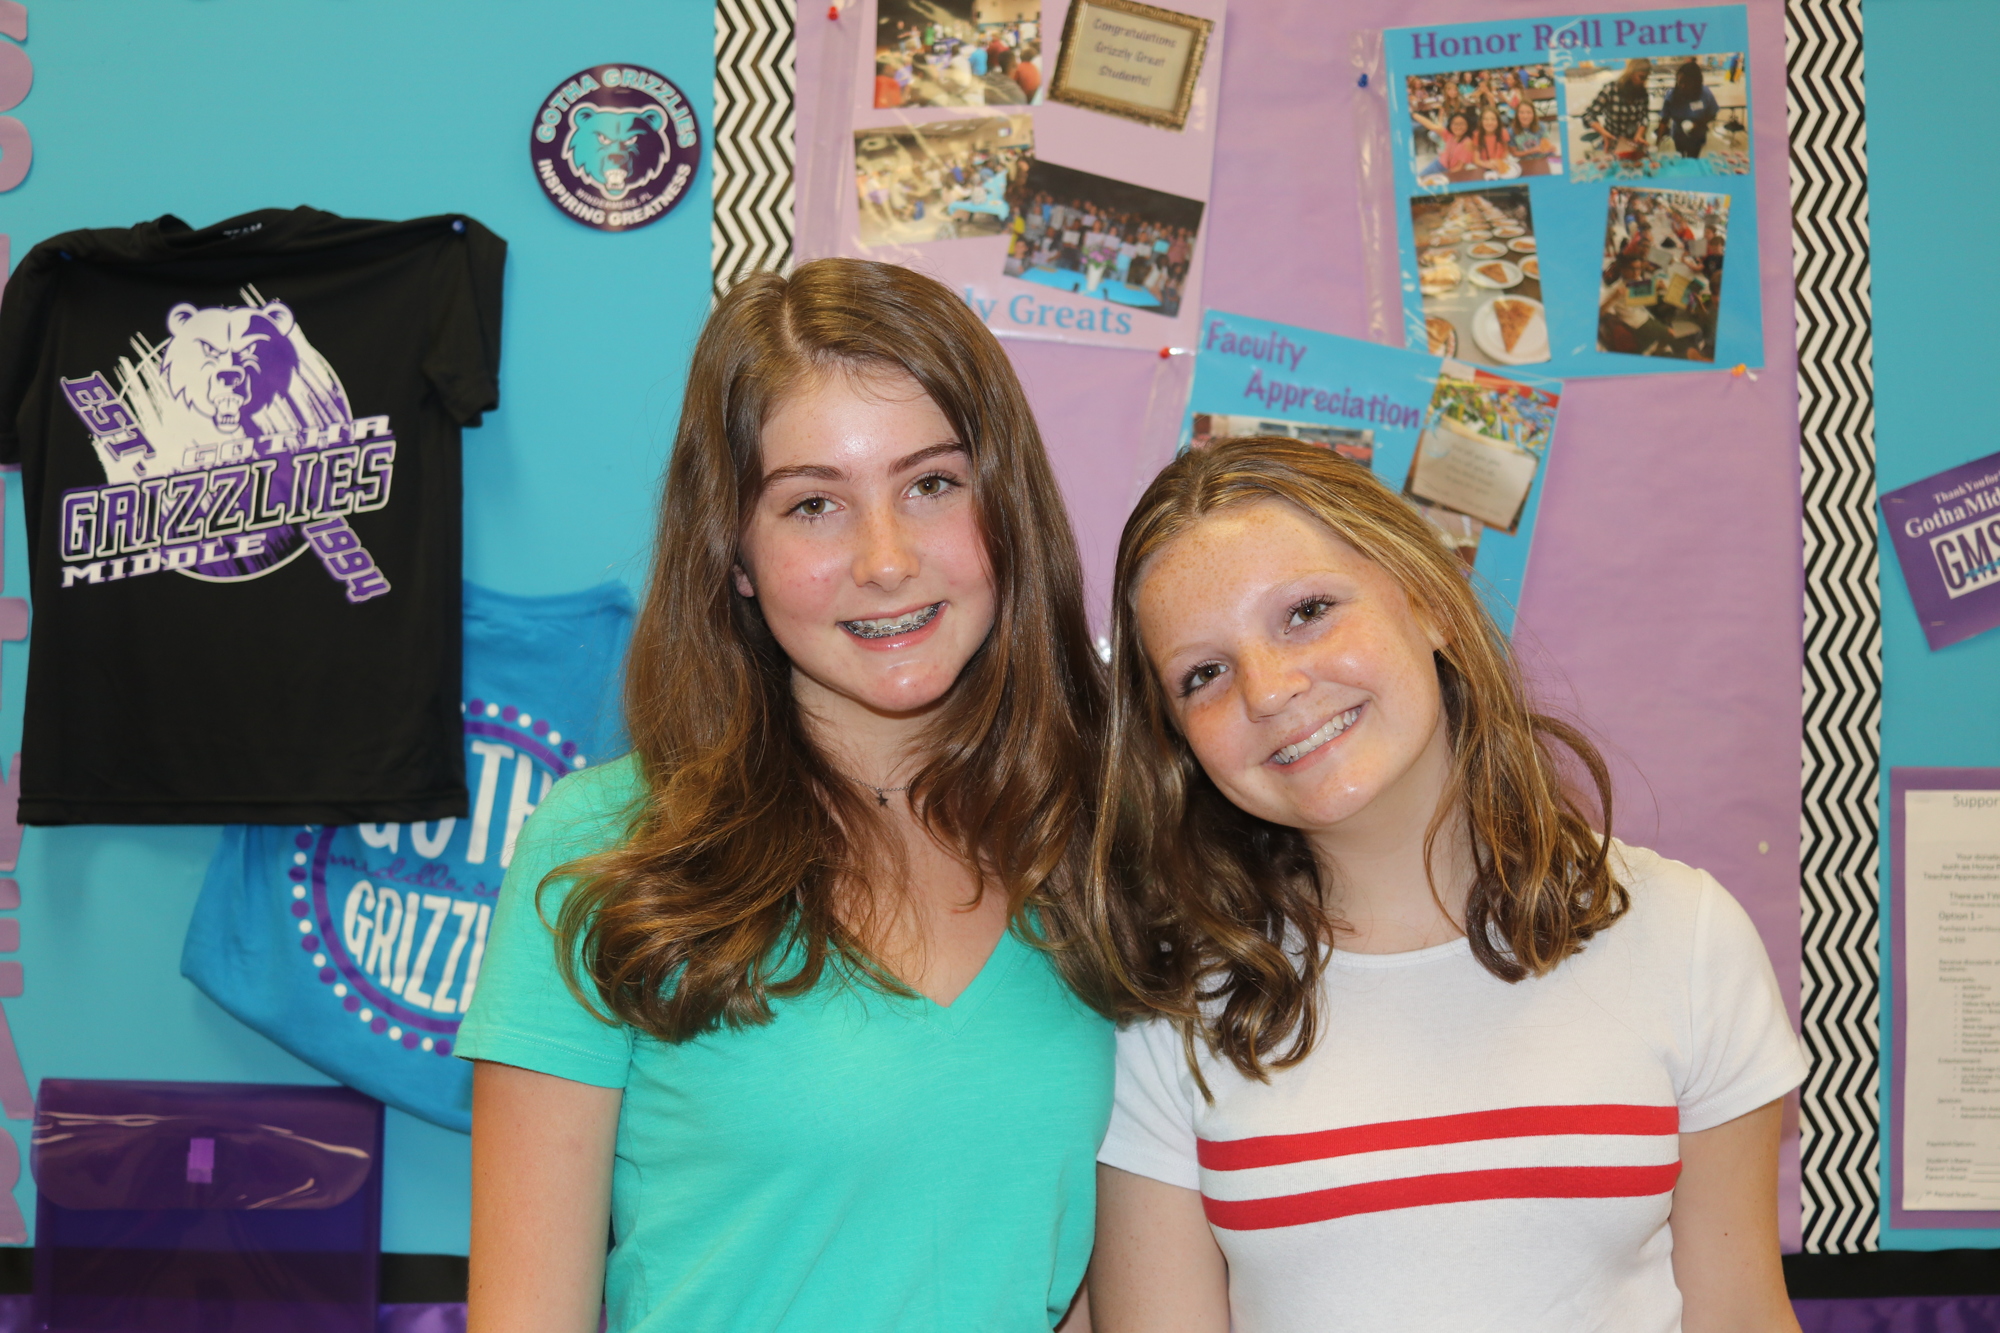 Lucy Dillon, left, and Piper Cristello each appeared in multiple scenes throughout the lip-dub video.